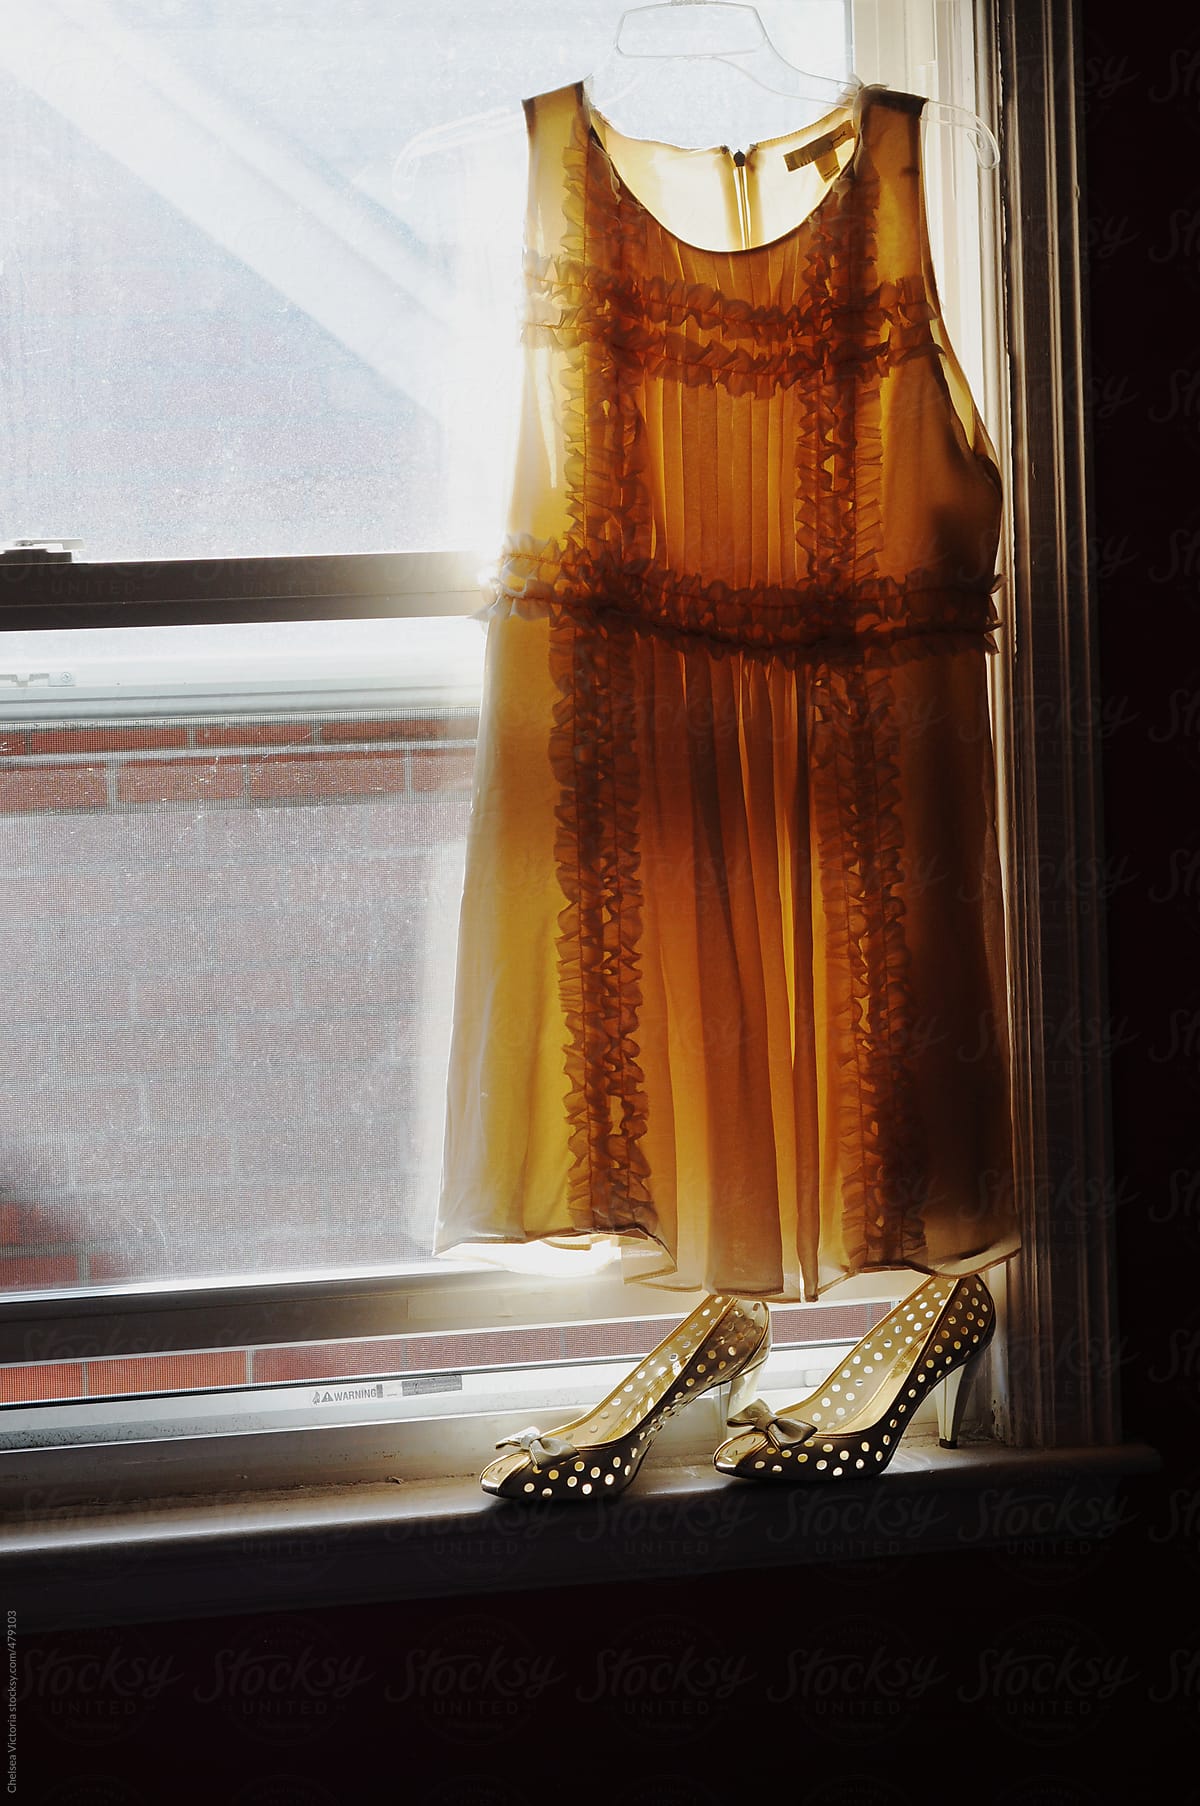 Dress and shoes on a window